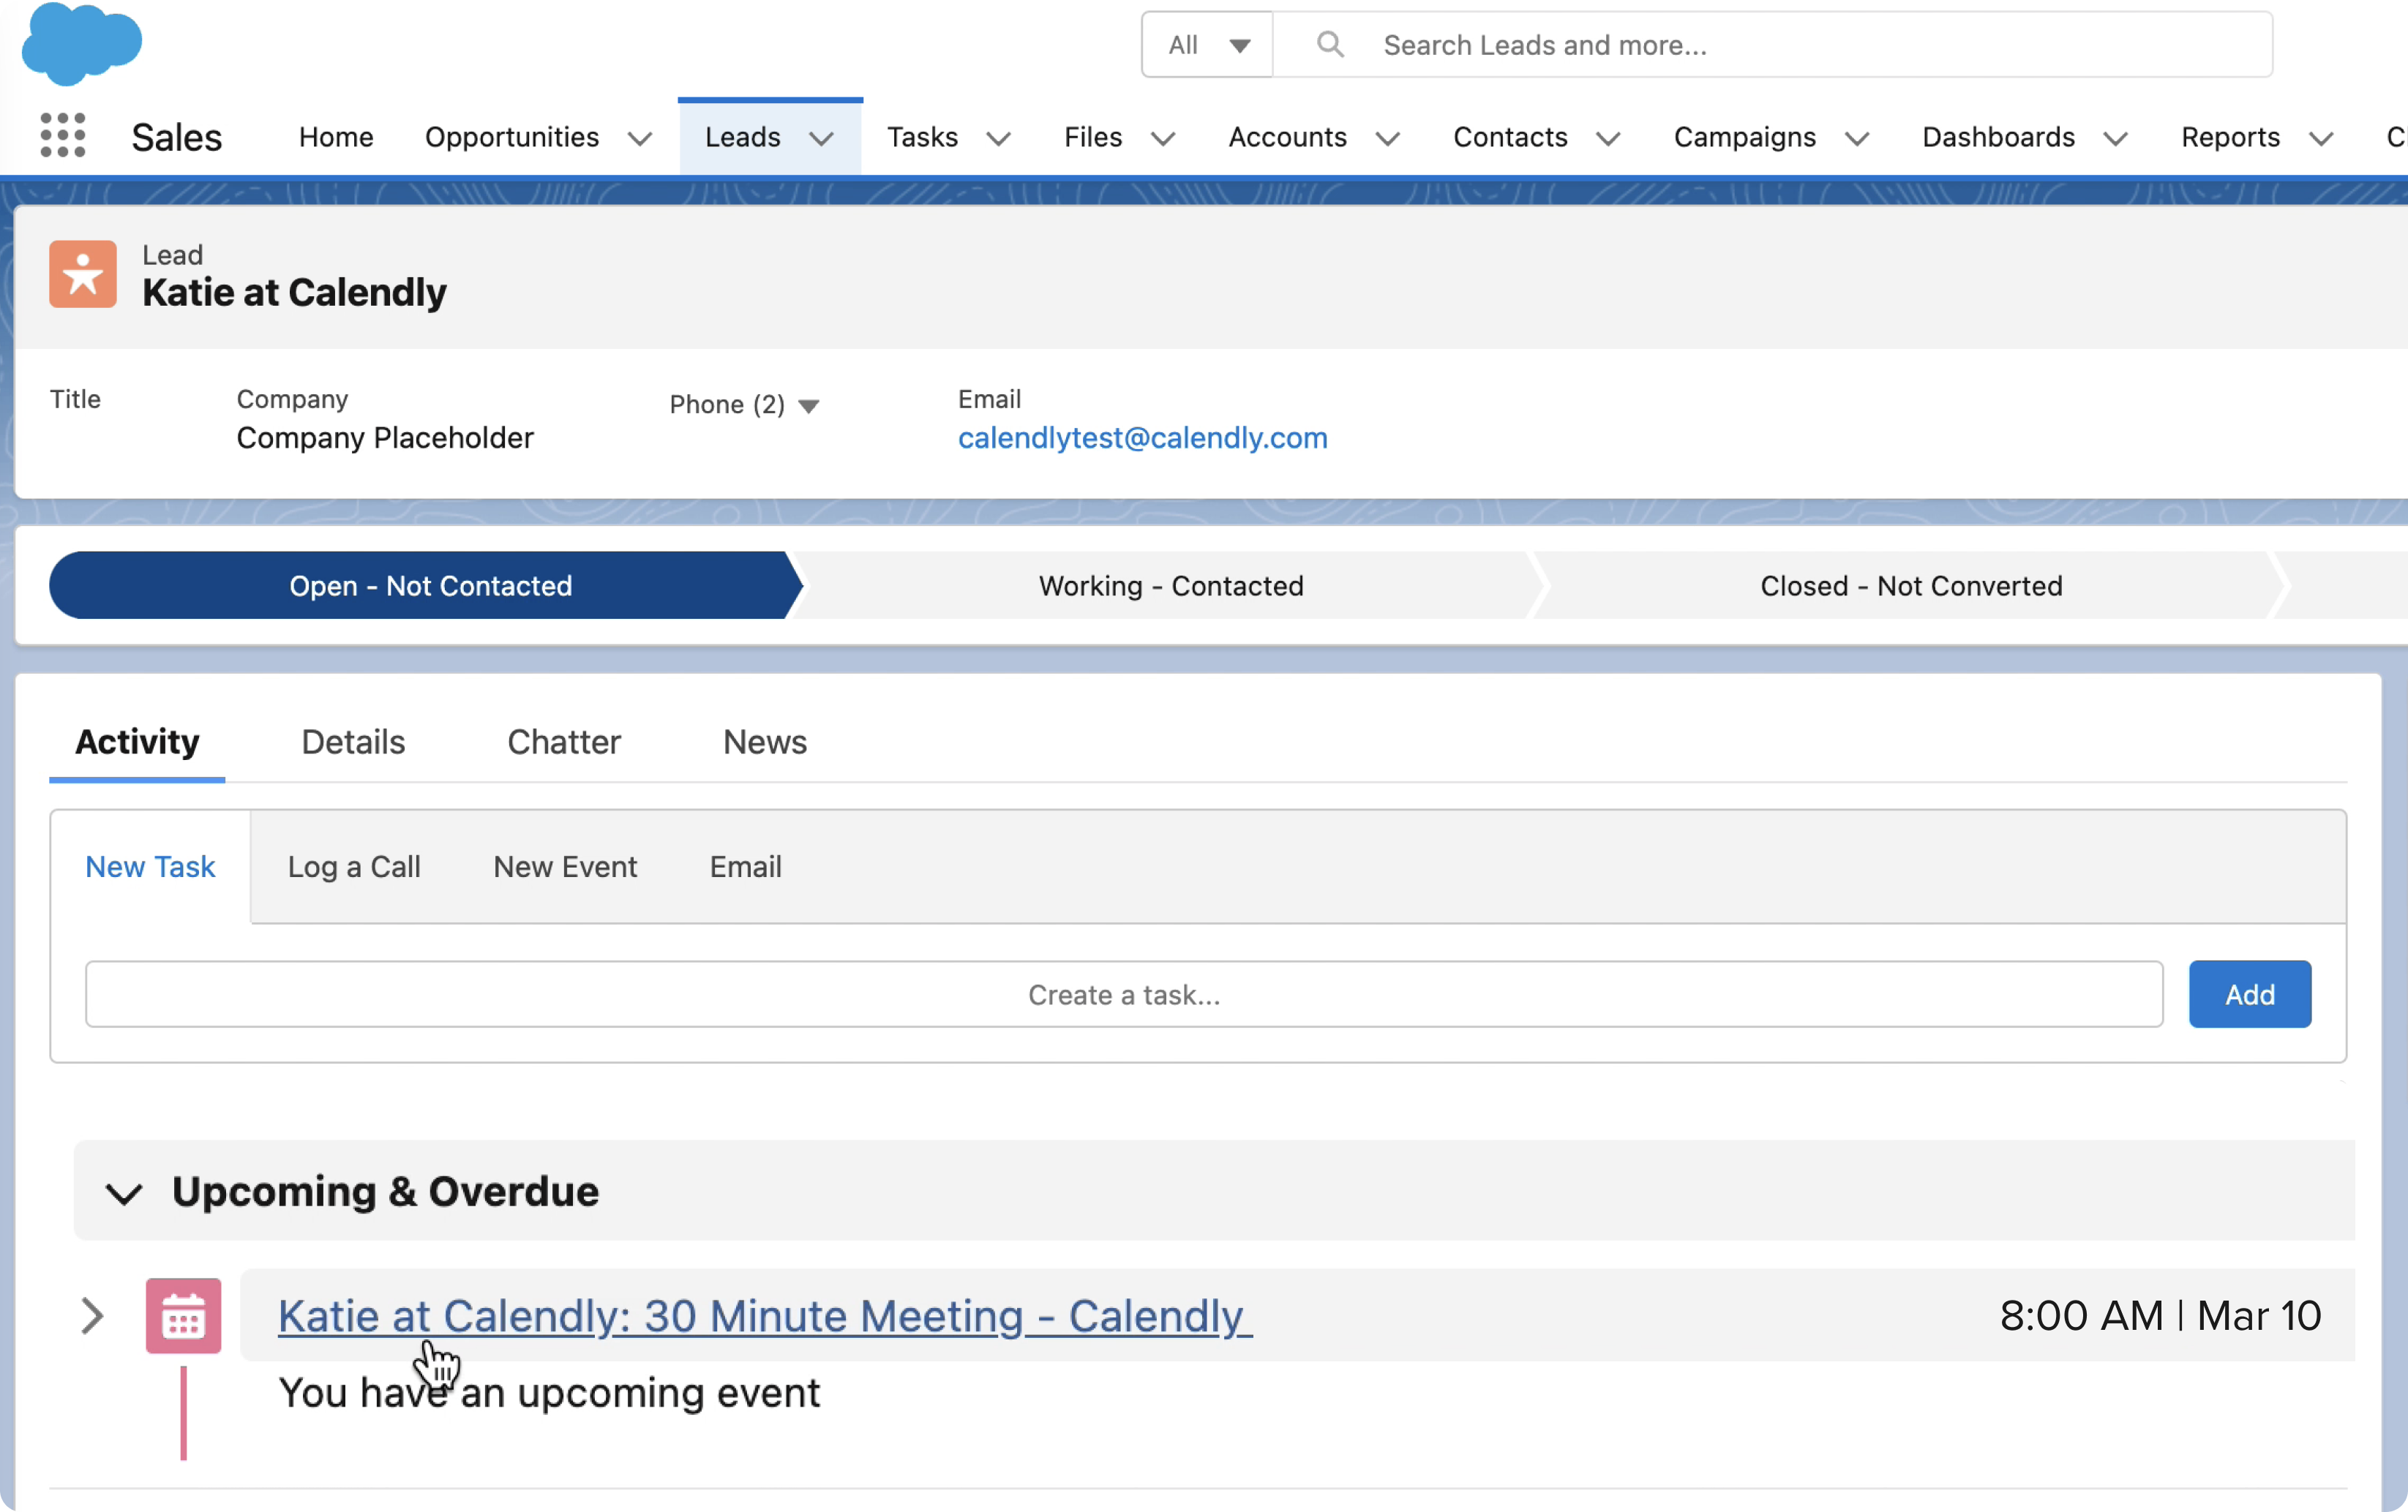 Screen image of Calendly meeting Event Type embedded in Salesforce activity record